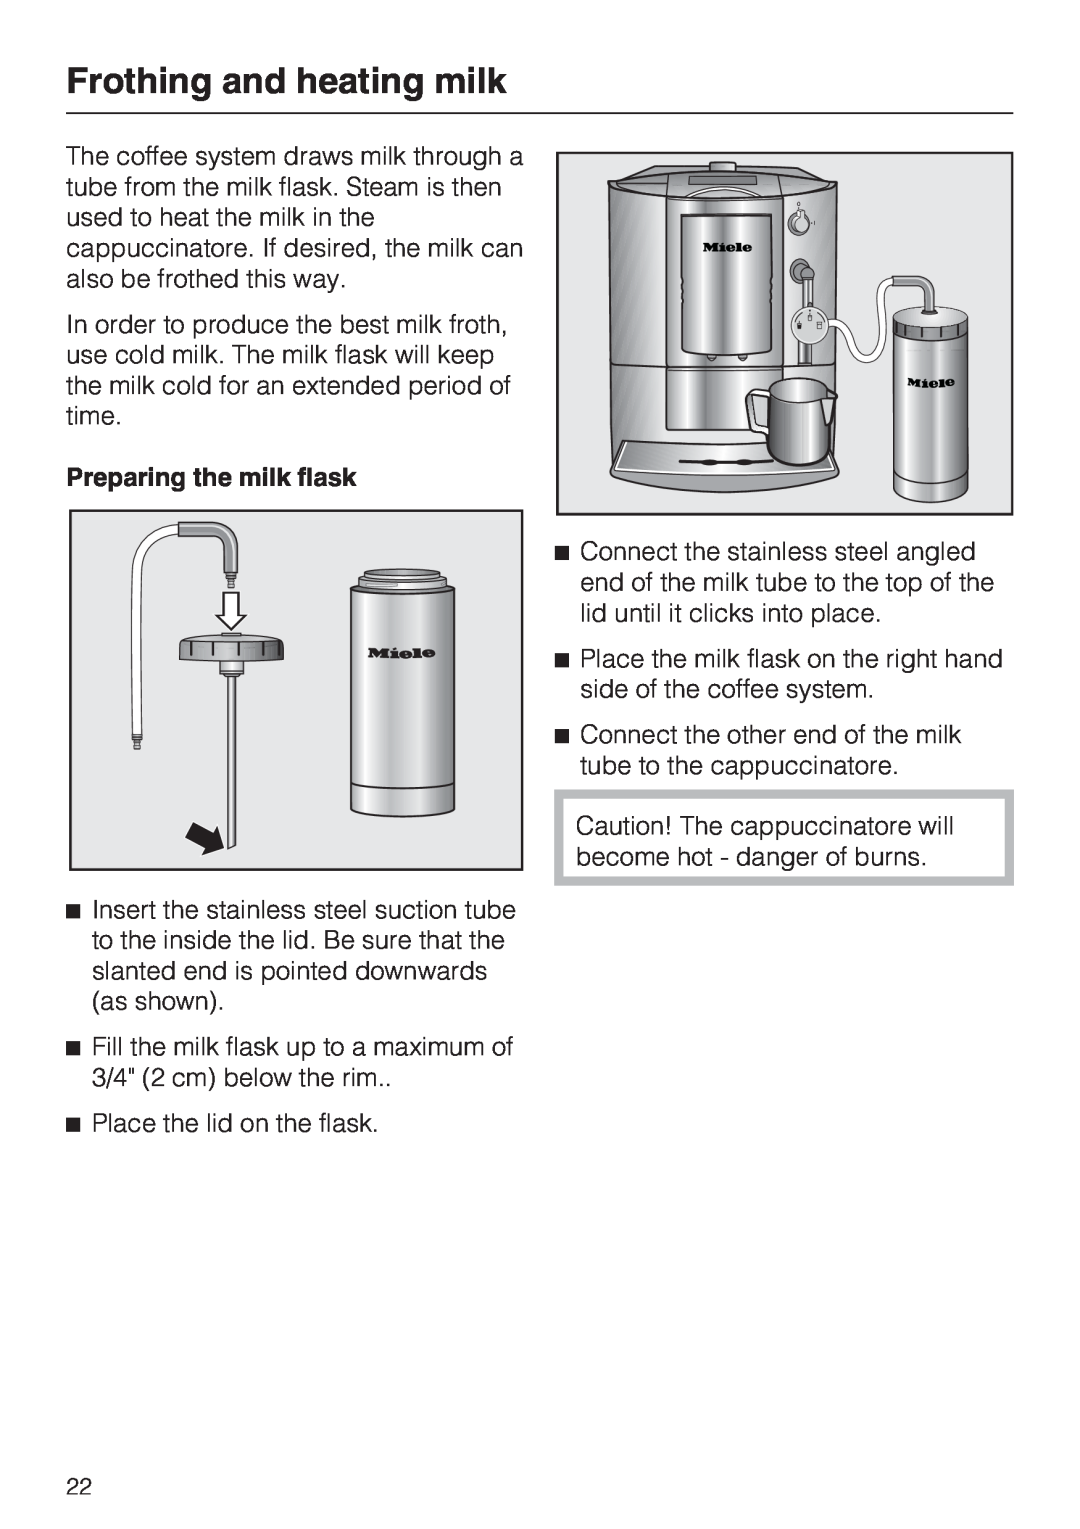 Miele CM 5000 operating instructions Frothing and heating milk, Preparing the milk flask 